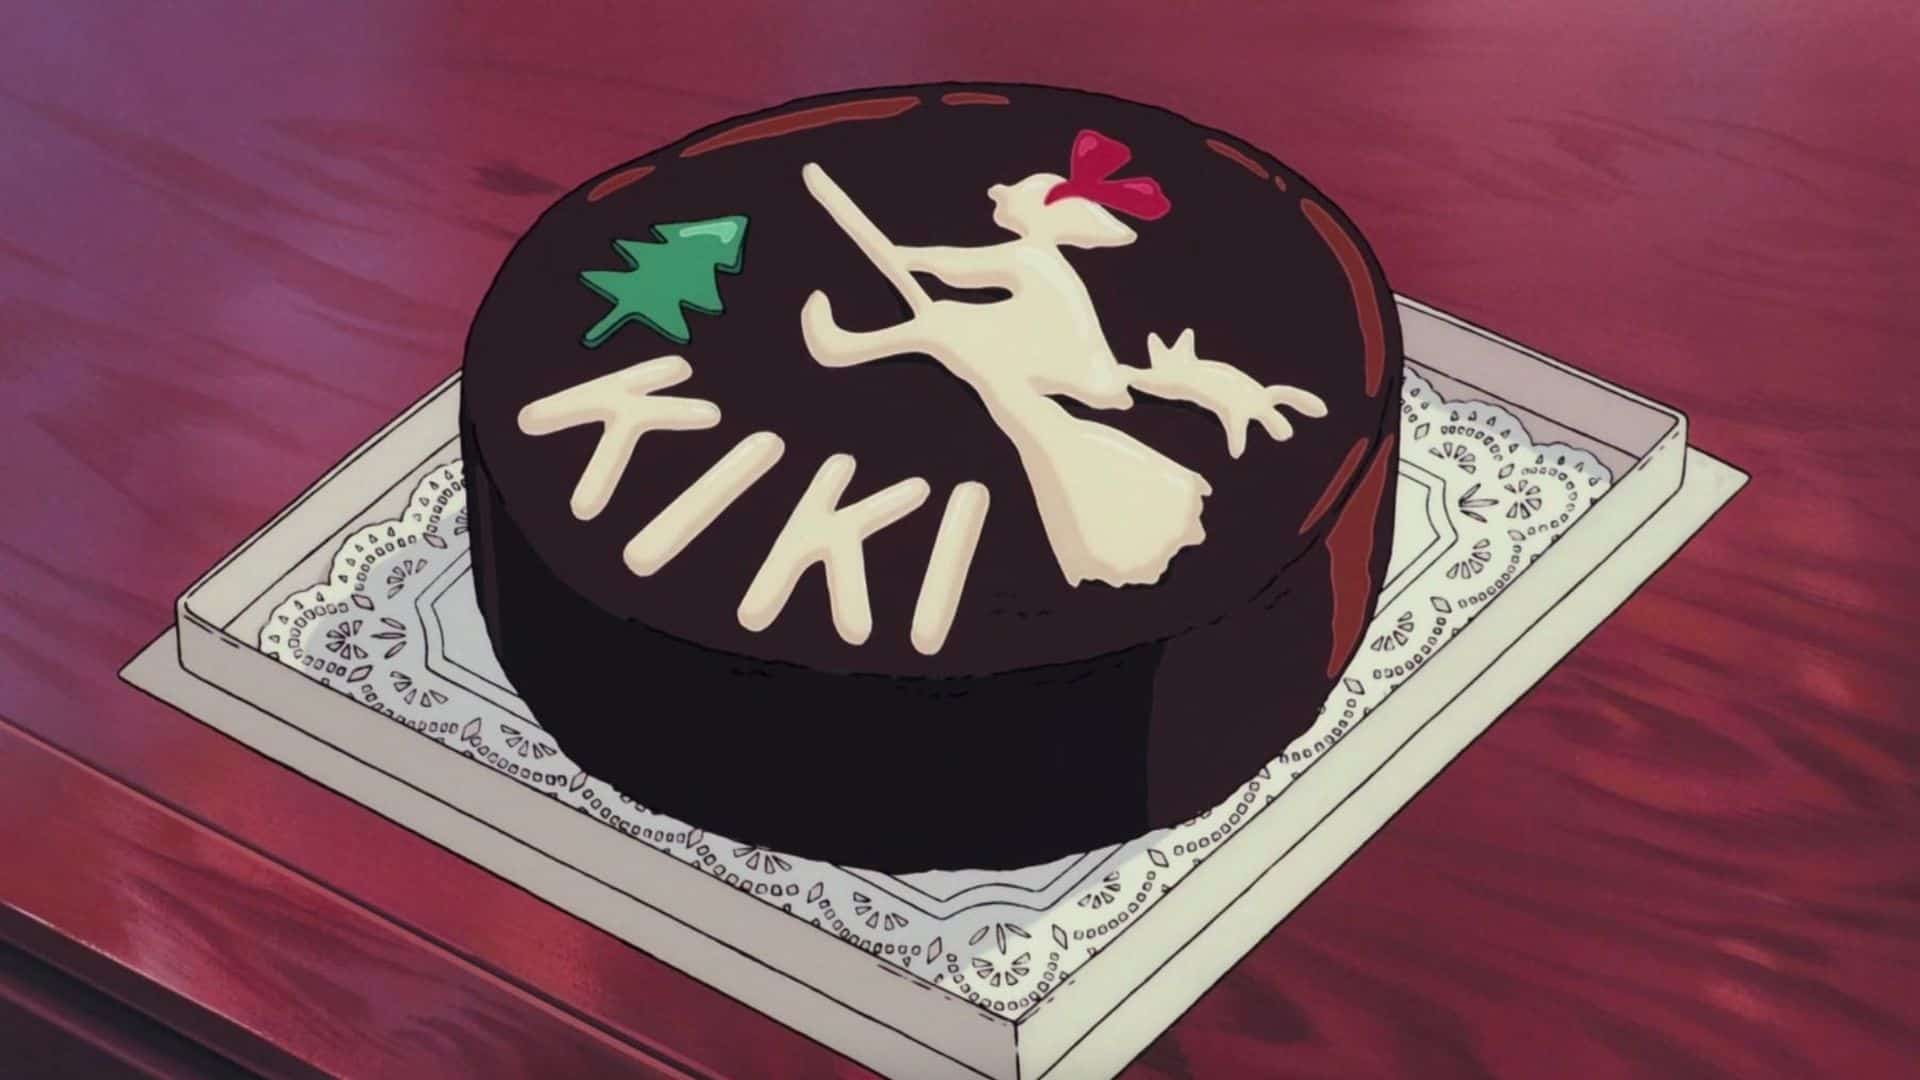 A frosted cake depicting Kiki flying on her broom in this image from Studio Ghibli